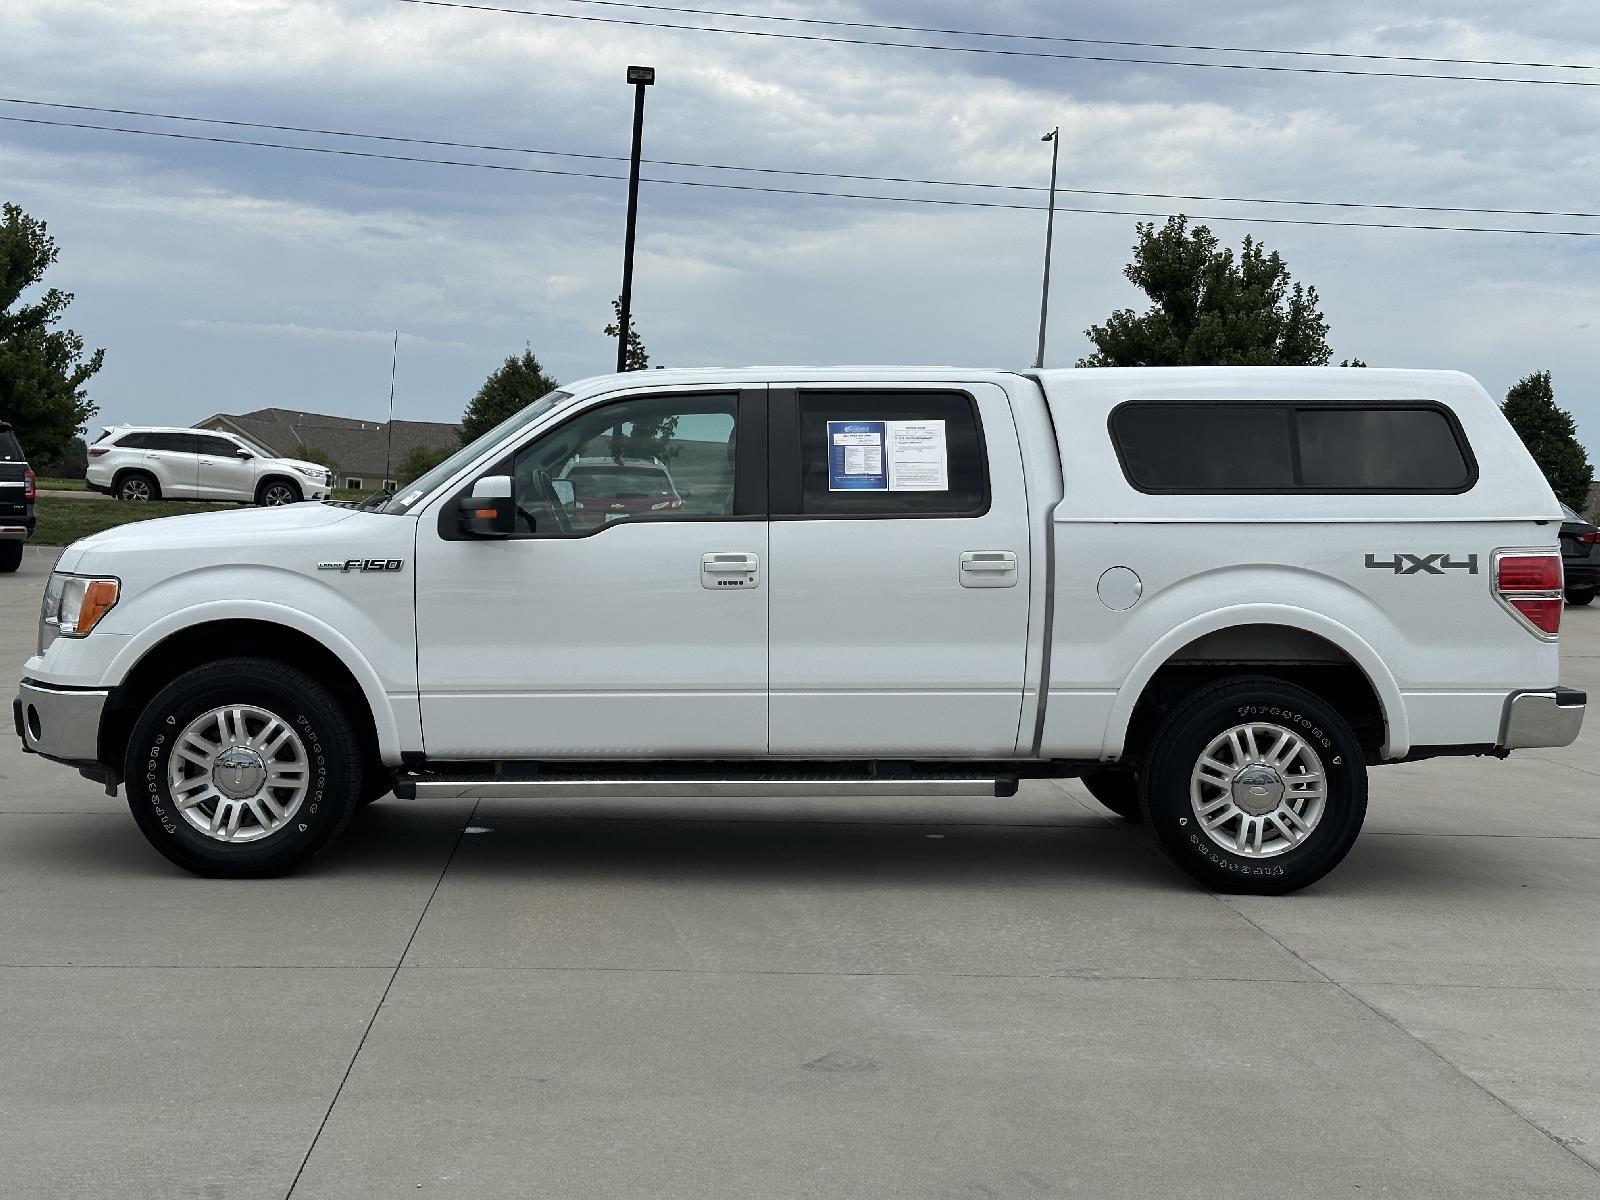 Used 2013 Ford F-150 Lariat Crew Cab Truck for sale in Lincoln NE